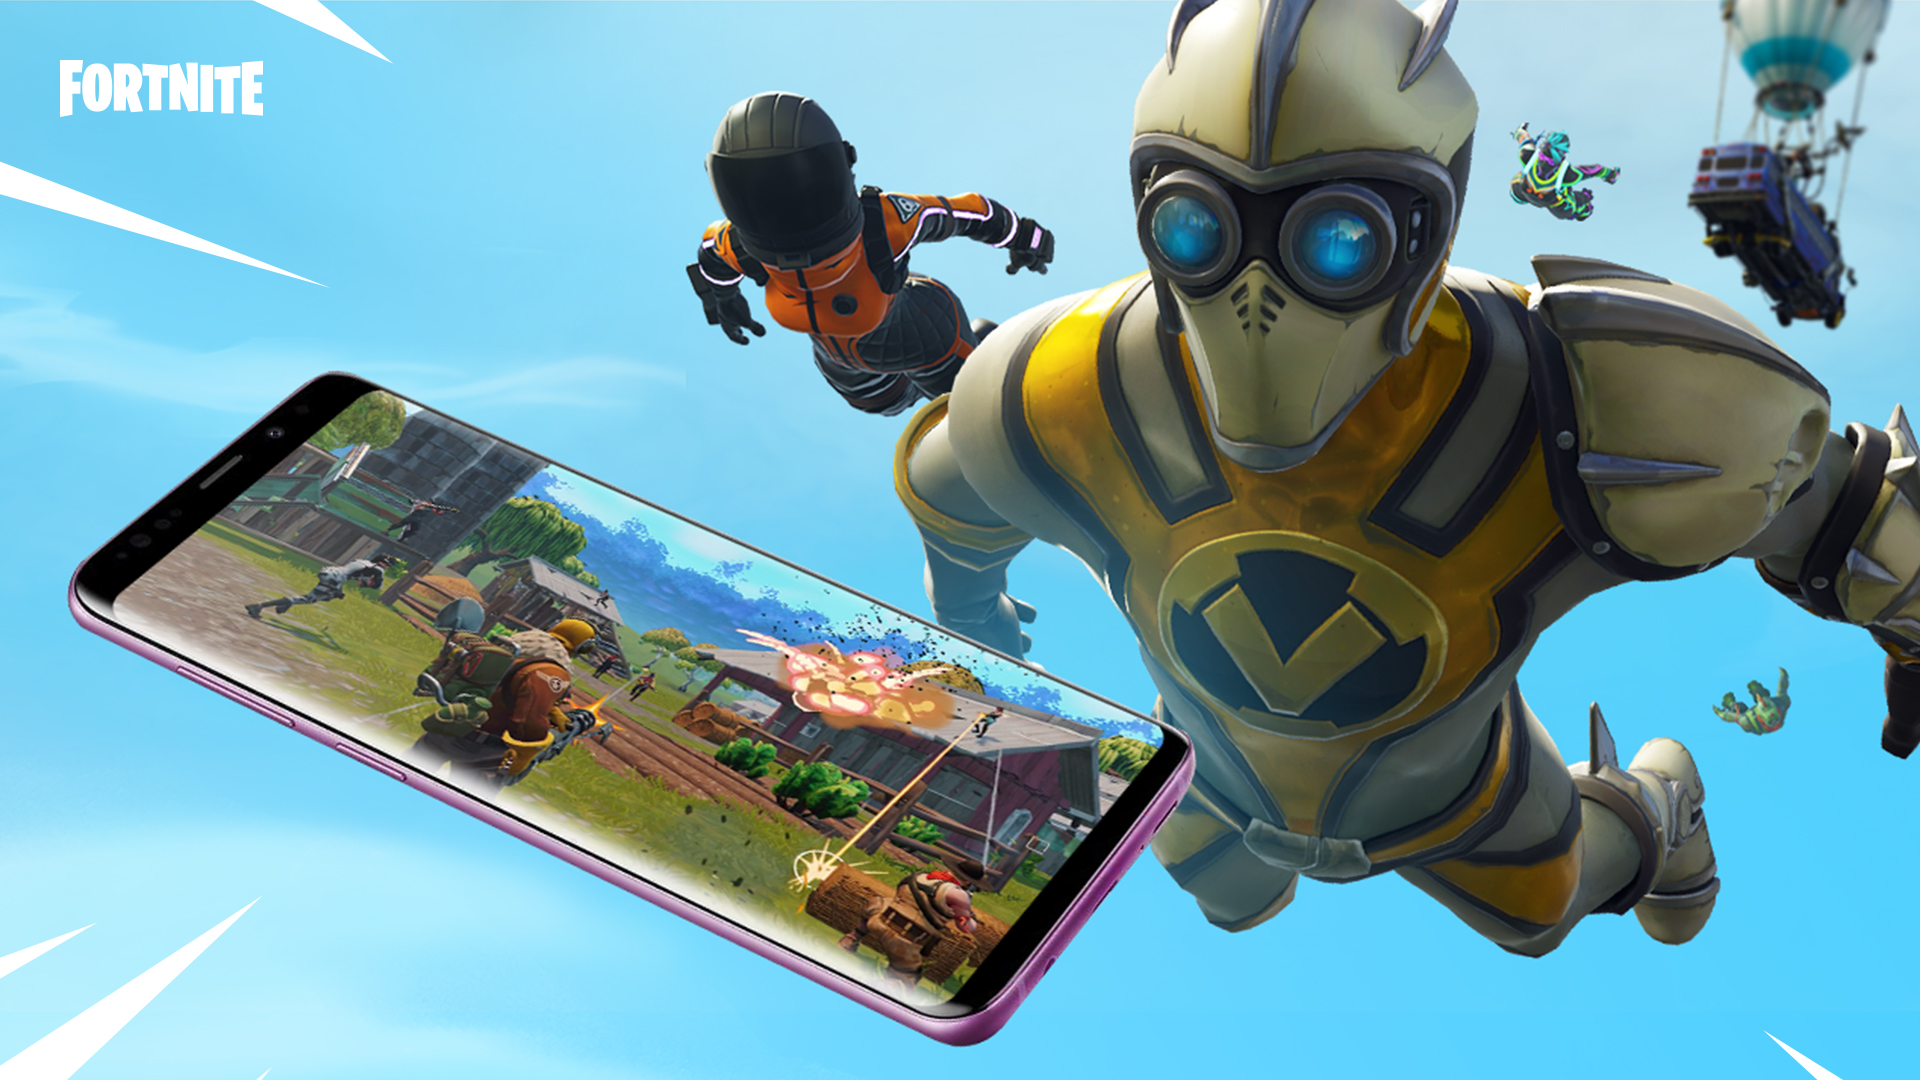 Fortnite is now available for Android as beta 1